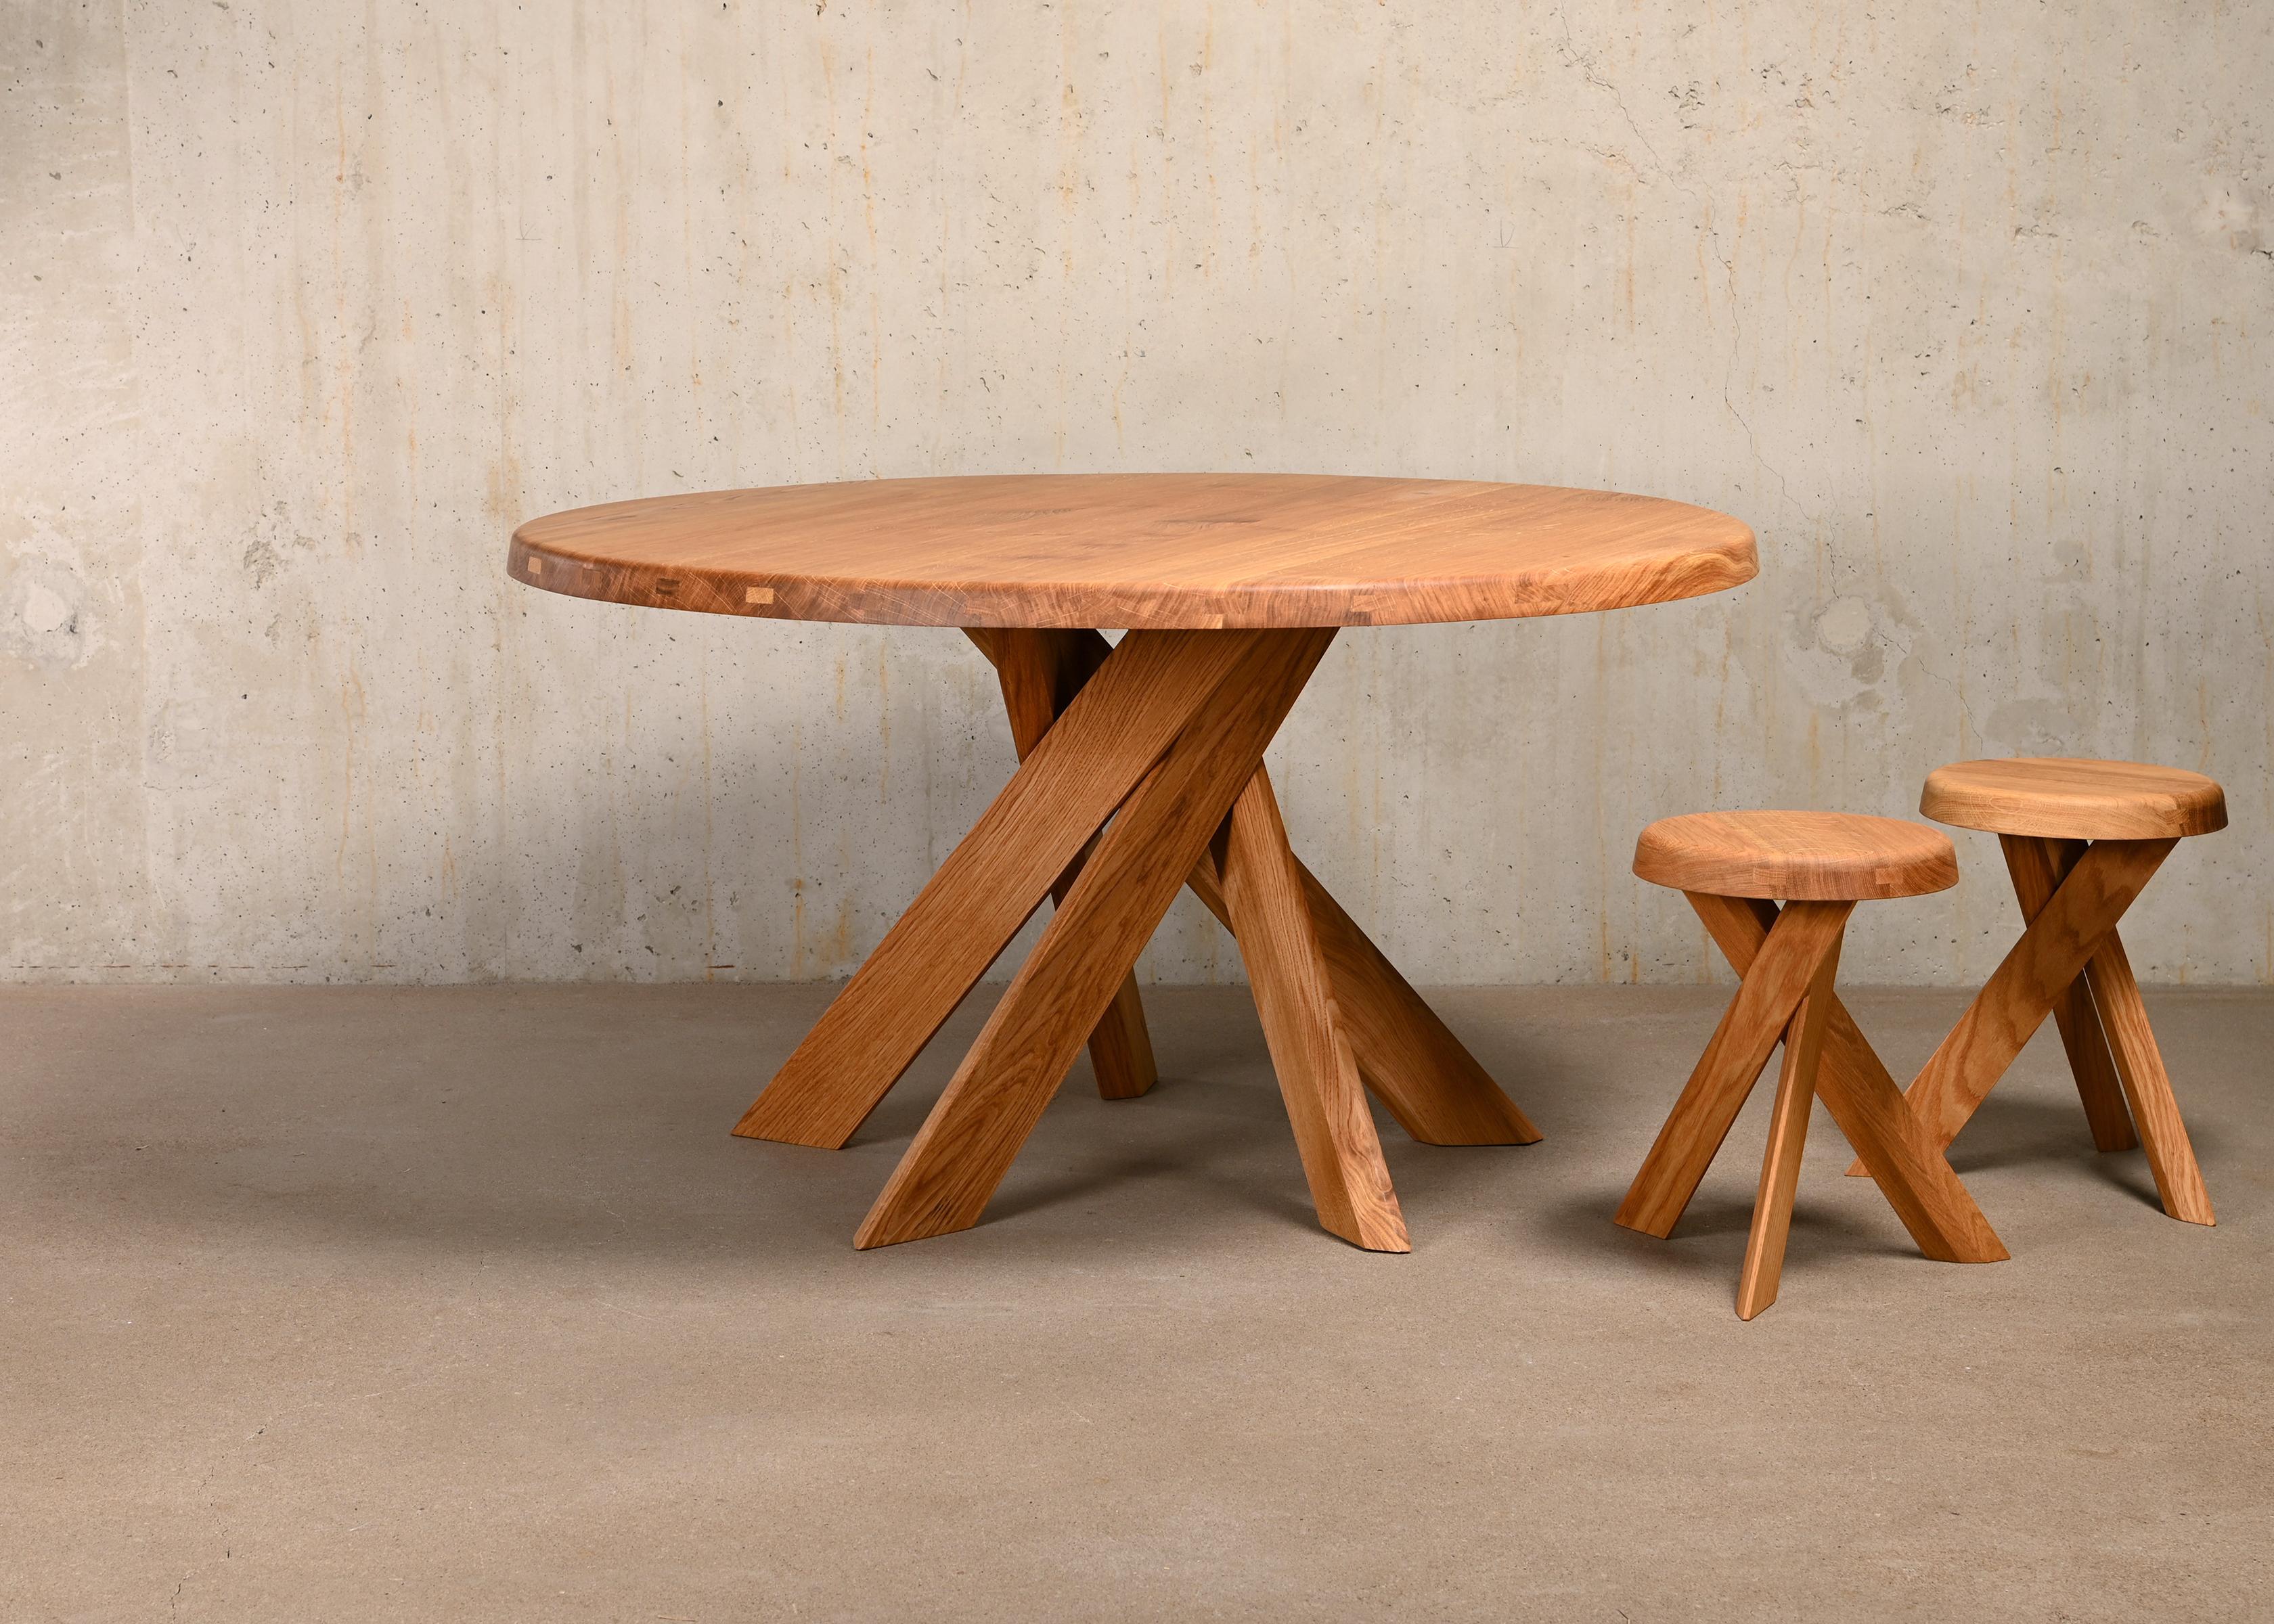 French Pierre Chapo Solid Oak T21 'Model D' Table by Chapo Creation, France